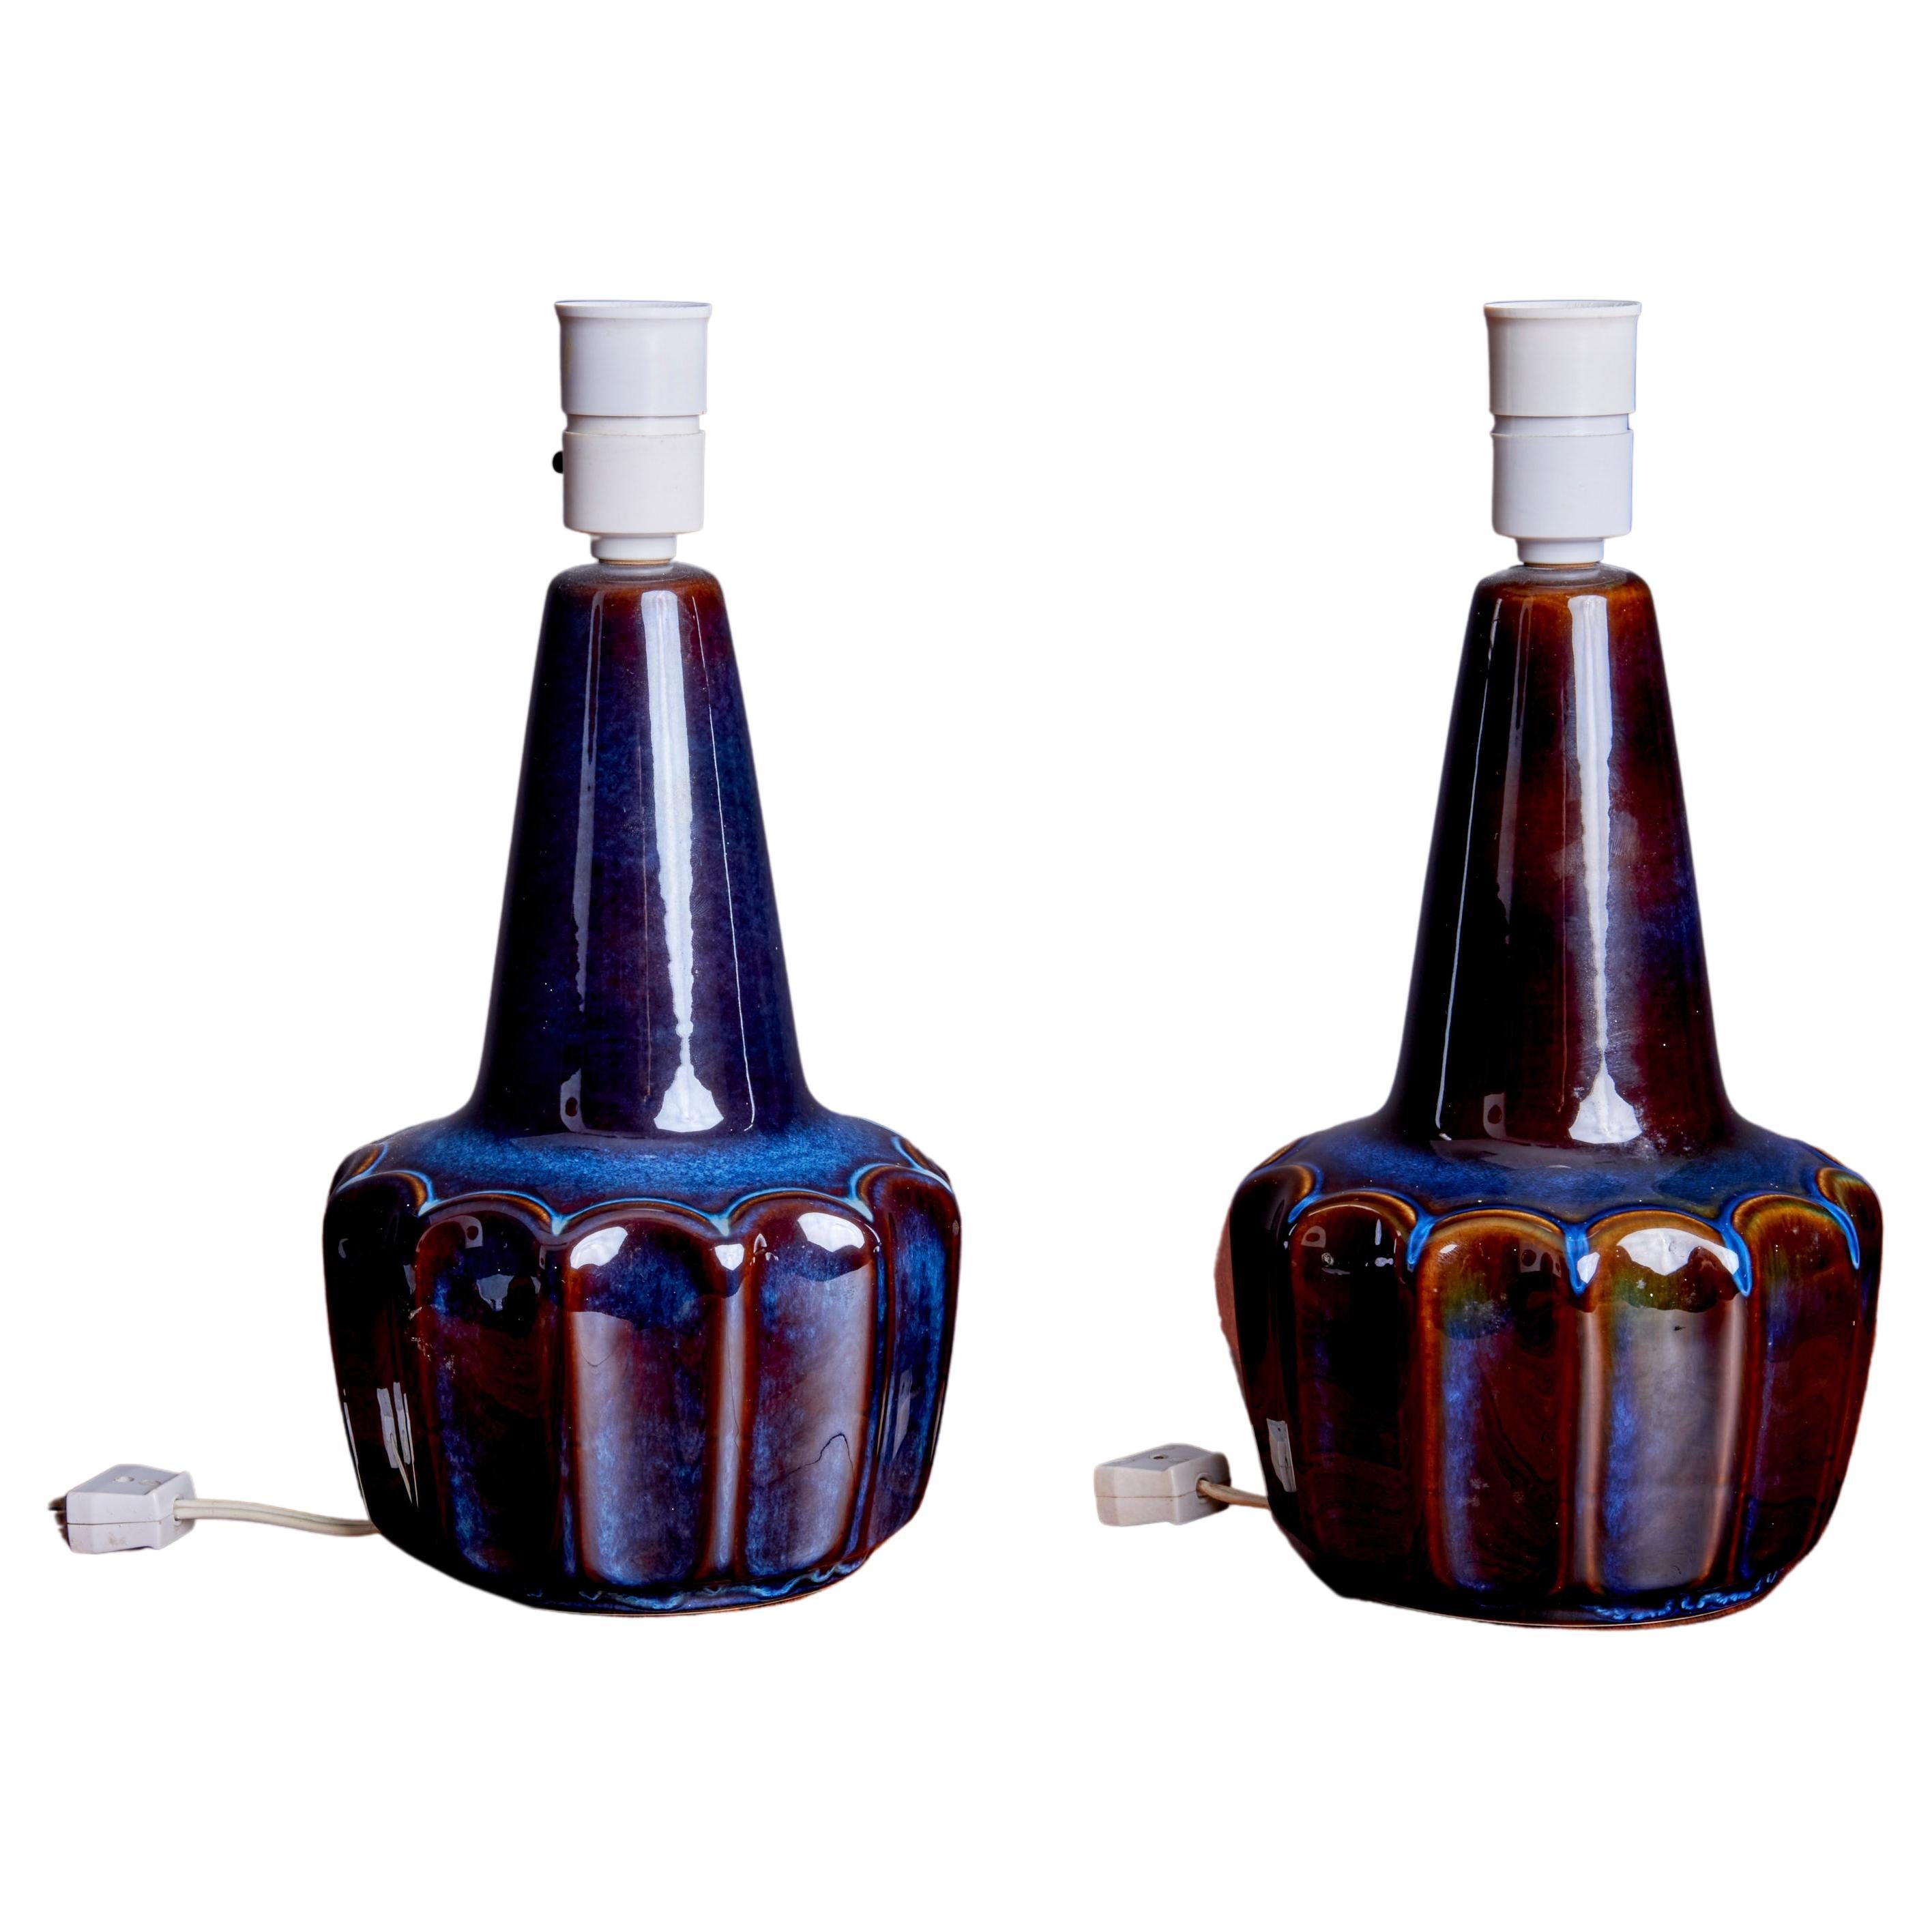 Pair of Dark Blue Ceramic Table Lamps by Soholm, Denmark, 1960s For Sale